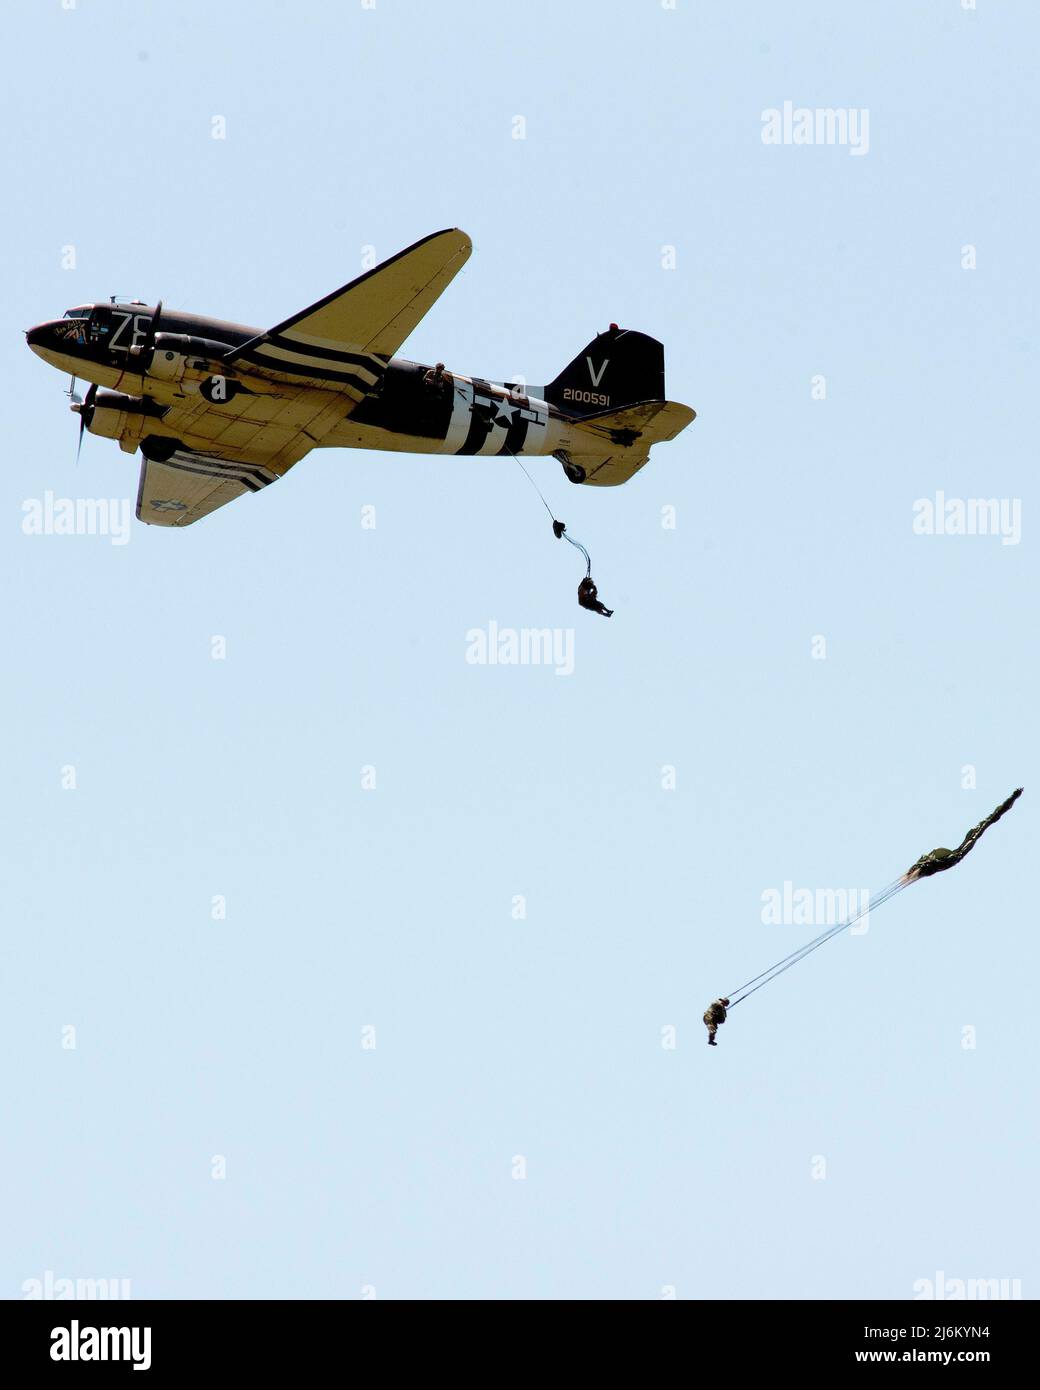 World War II paratroop reenactors jump from Tico Belle, a C-47 Skytrain, on April 27, 2022, over the National Museum of the U.S. Air Force at Wright-Patterson Air Force Base, Ohio. The aircraft, a veteran of the D-Day invasion, then landed on the runway behind the museum and was on display until its departure the next day. (U.S. Air Force photo by R.J. Oriez) Stock Photo